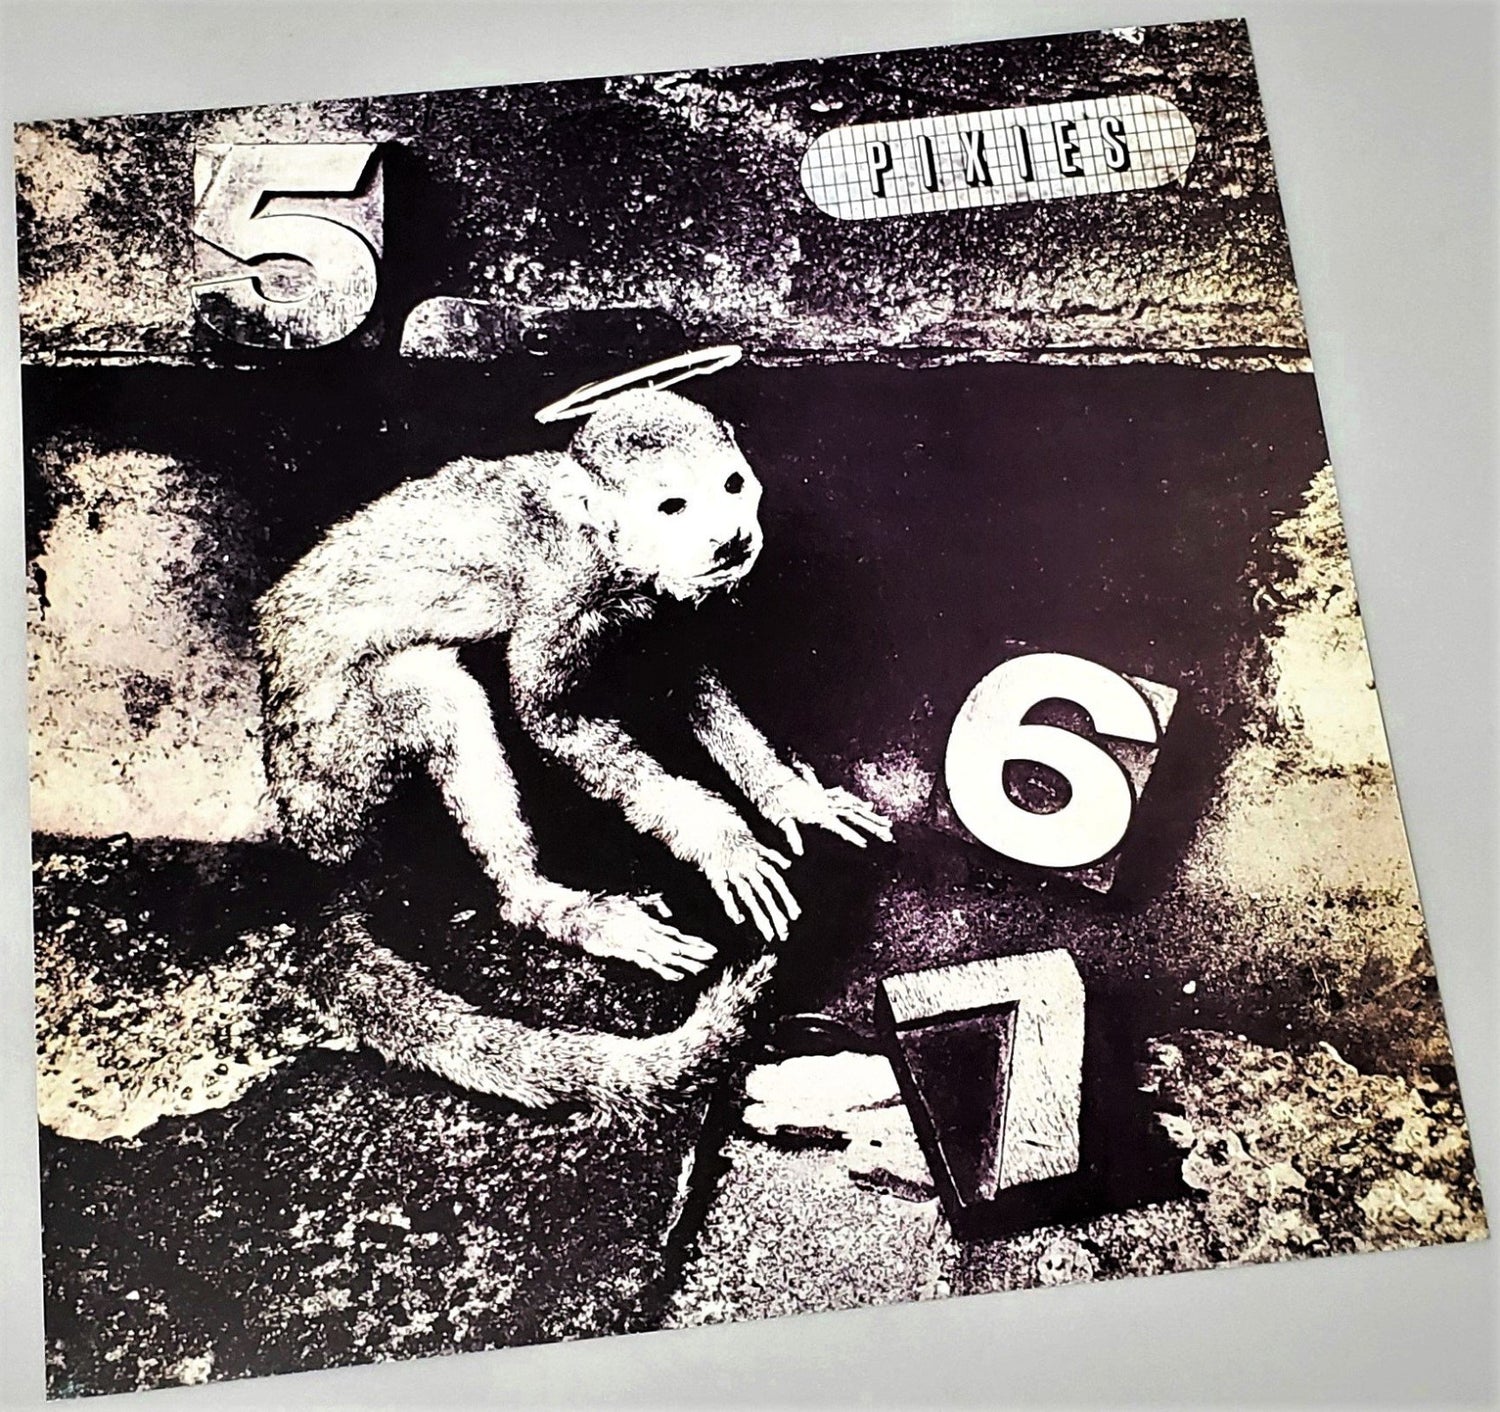 Pixies 1989 Doolittle album cover art page featured in Rock Covers 2014  book